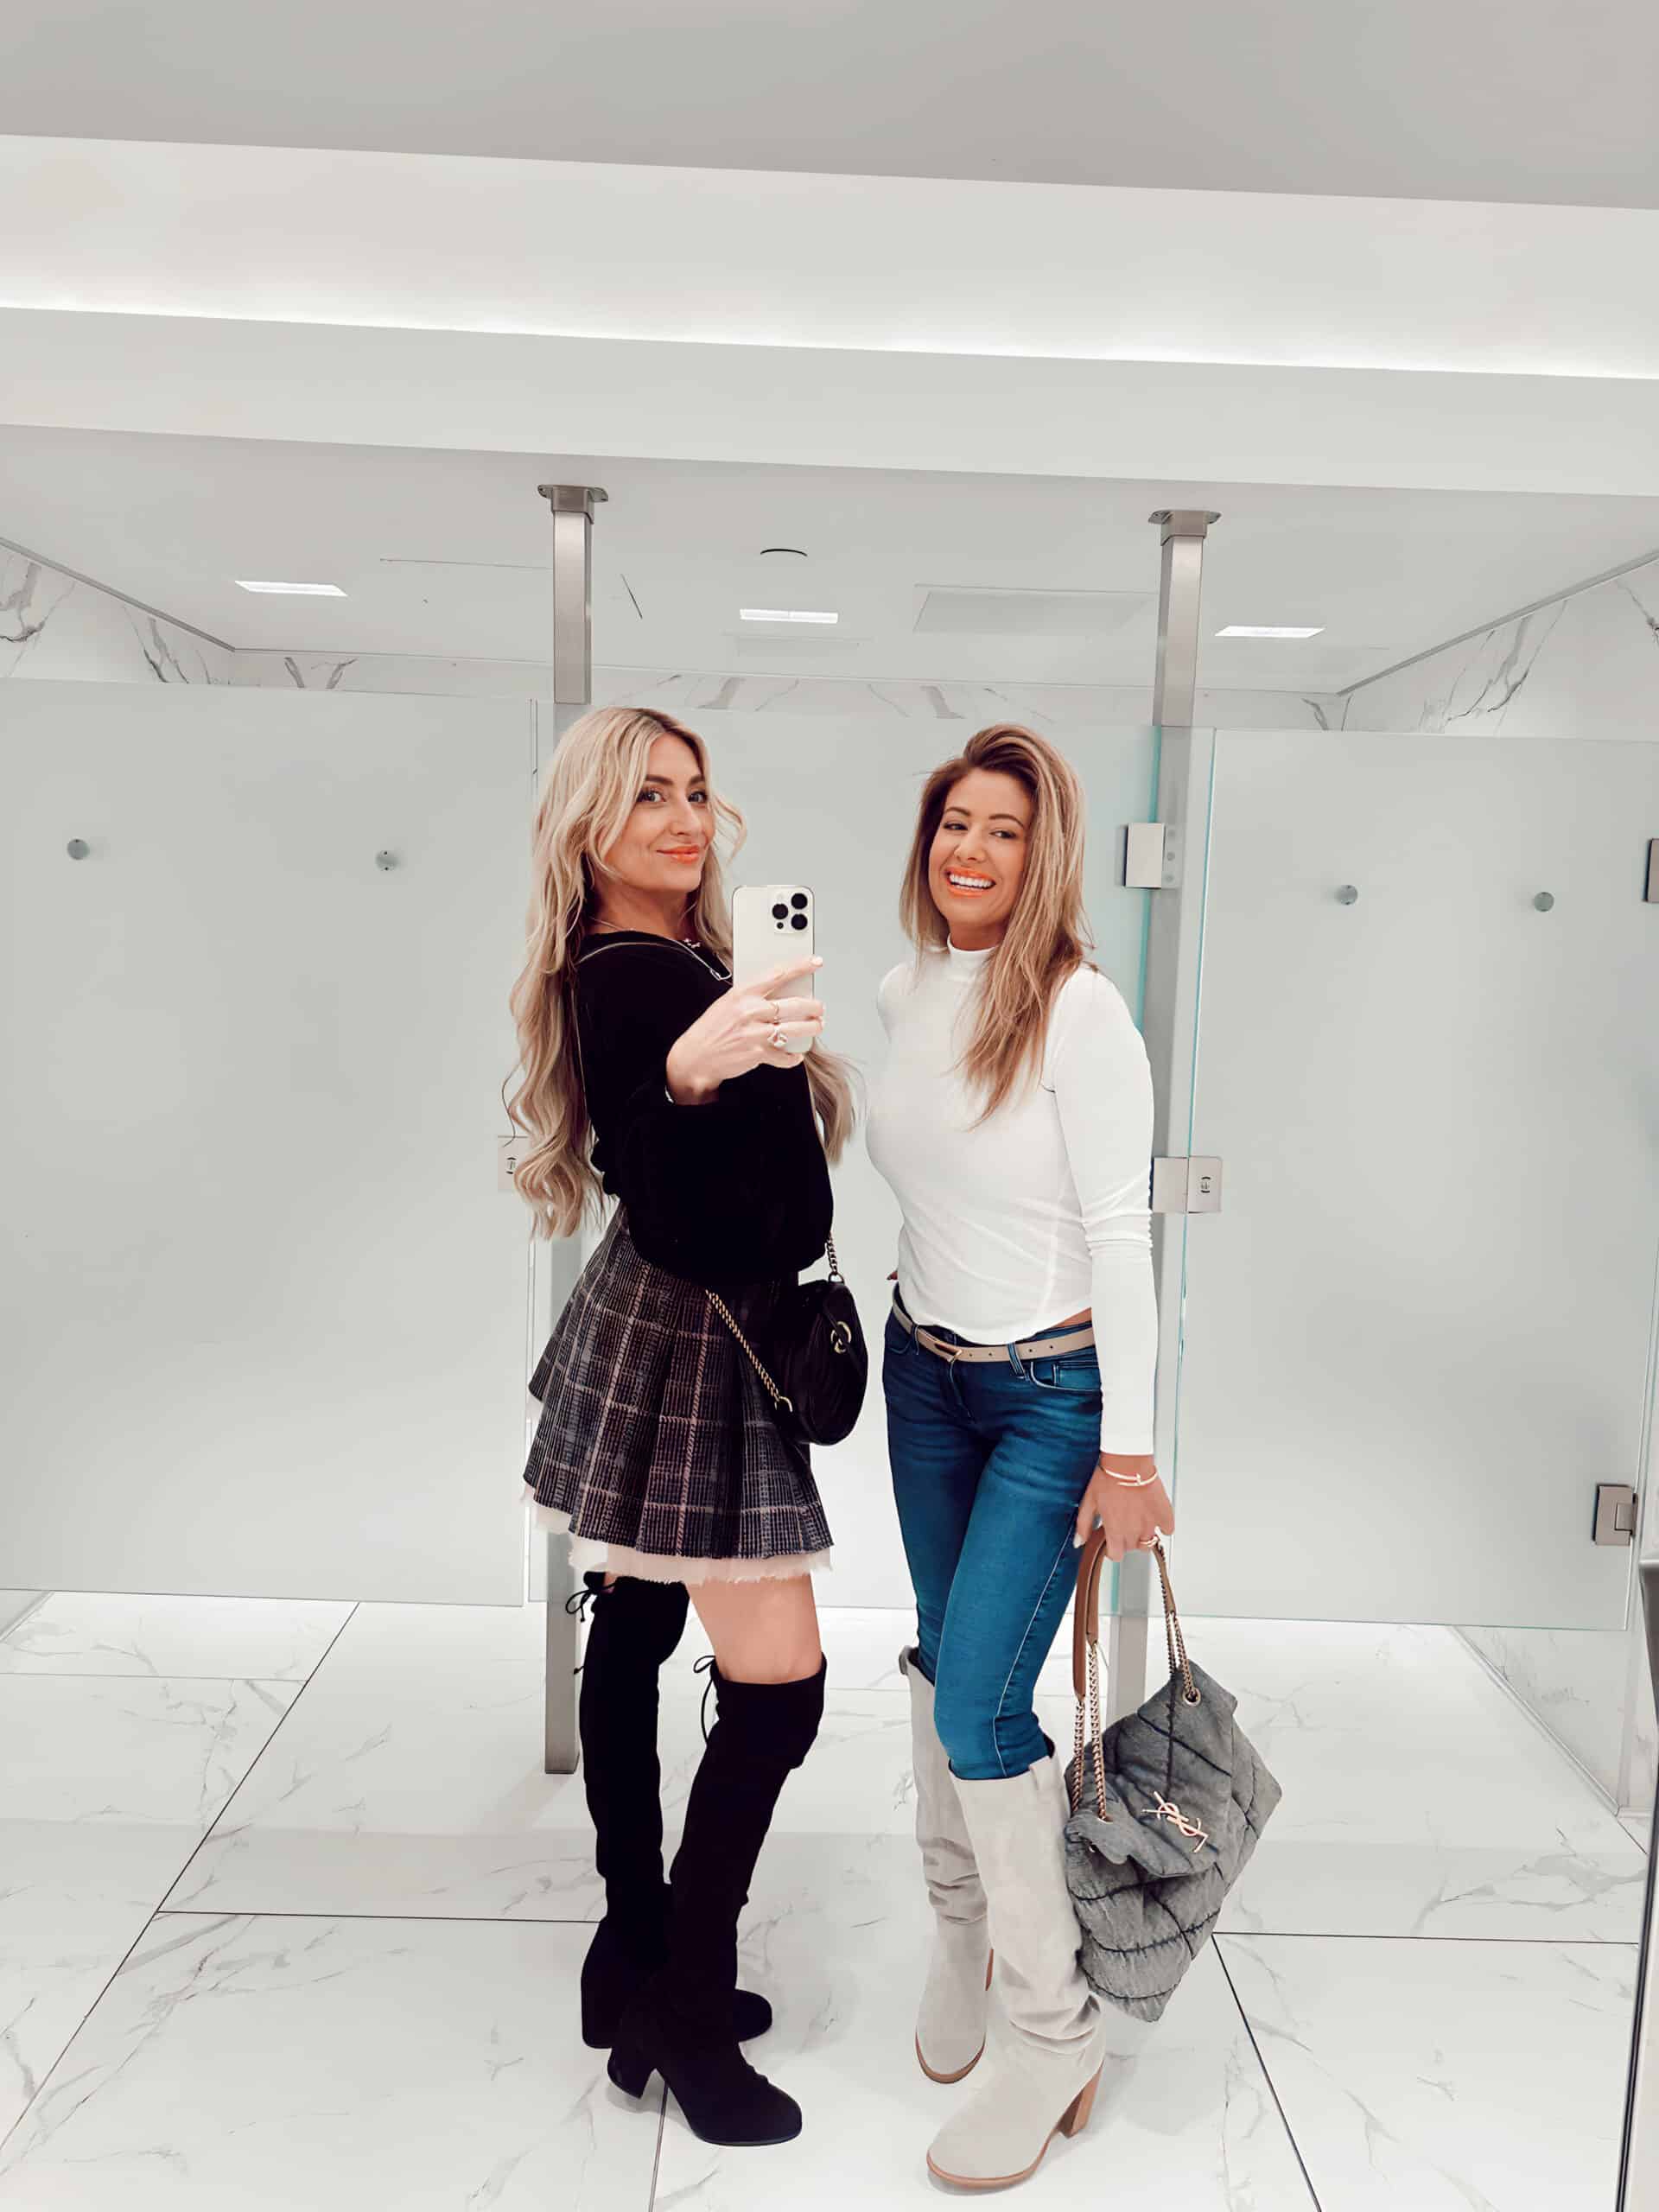 2 woman standing together in a bathroom